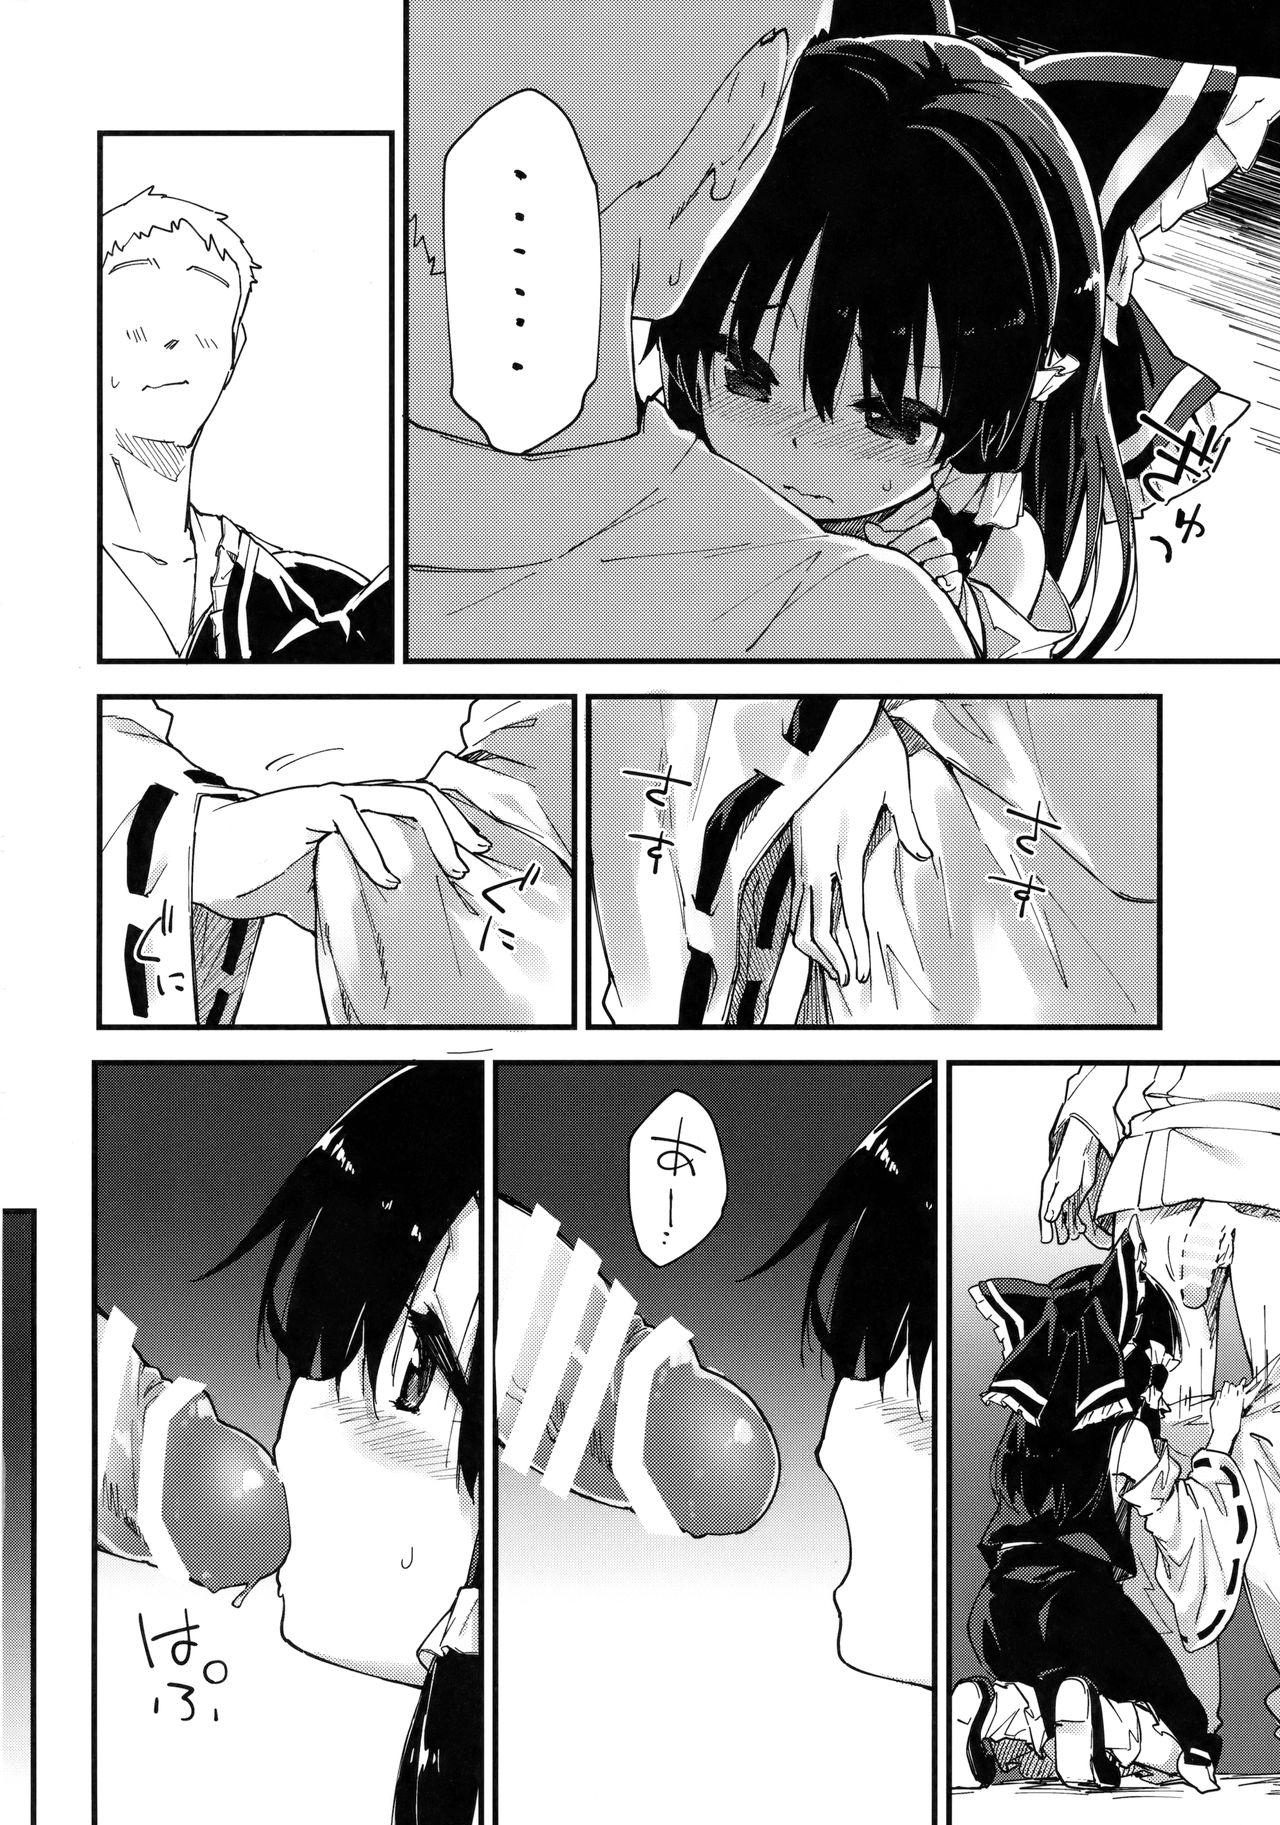 From Reimu-chan to Sukebe Suru Hon - Touhou project Submissive - Page 11